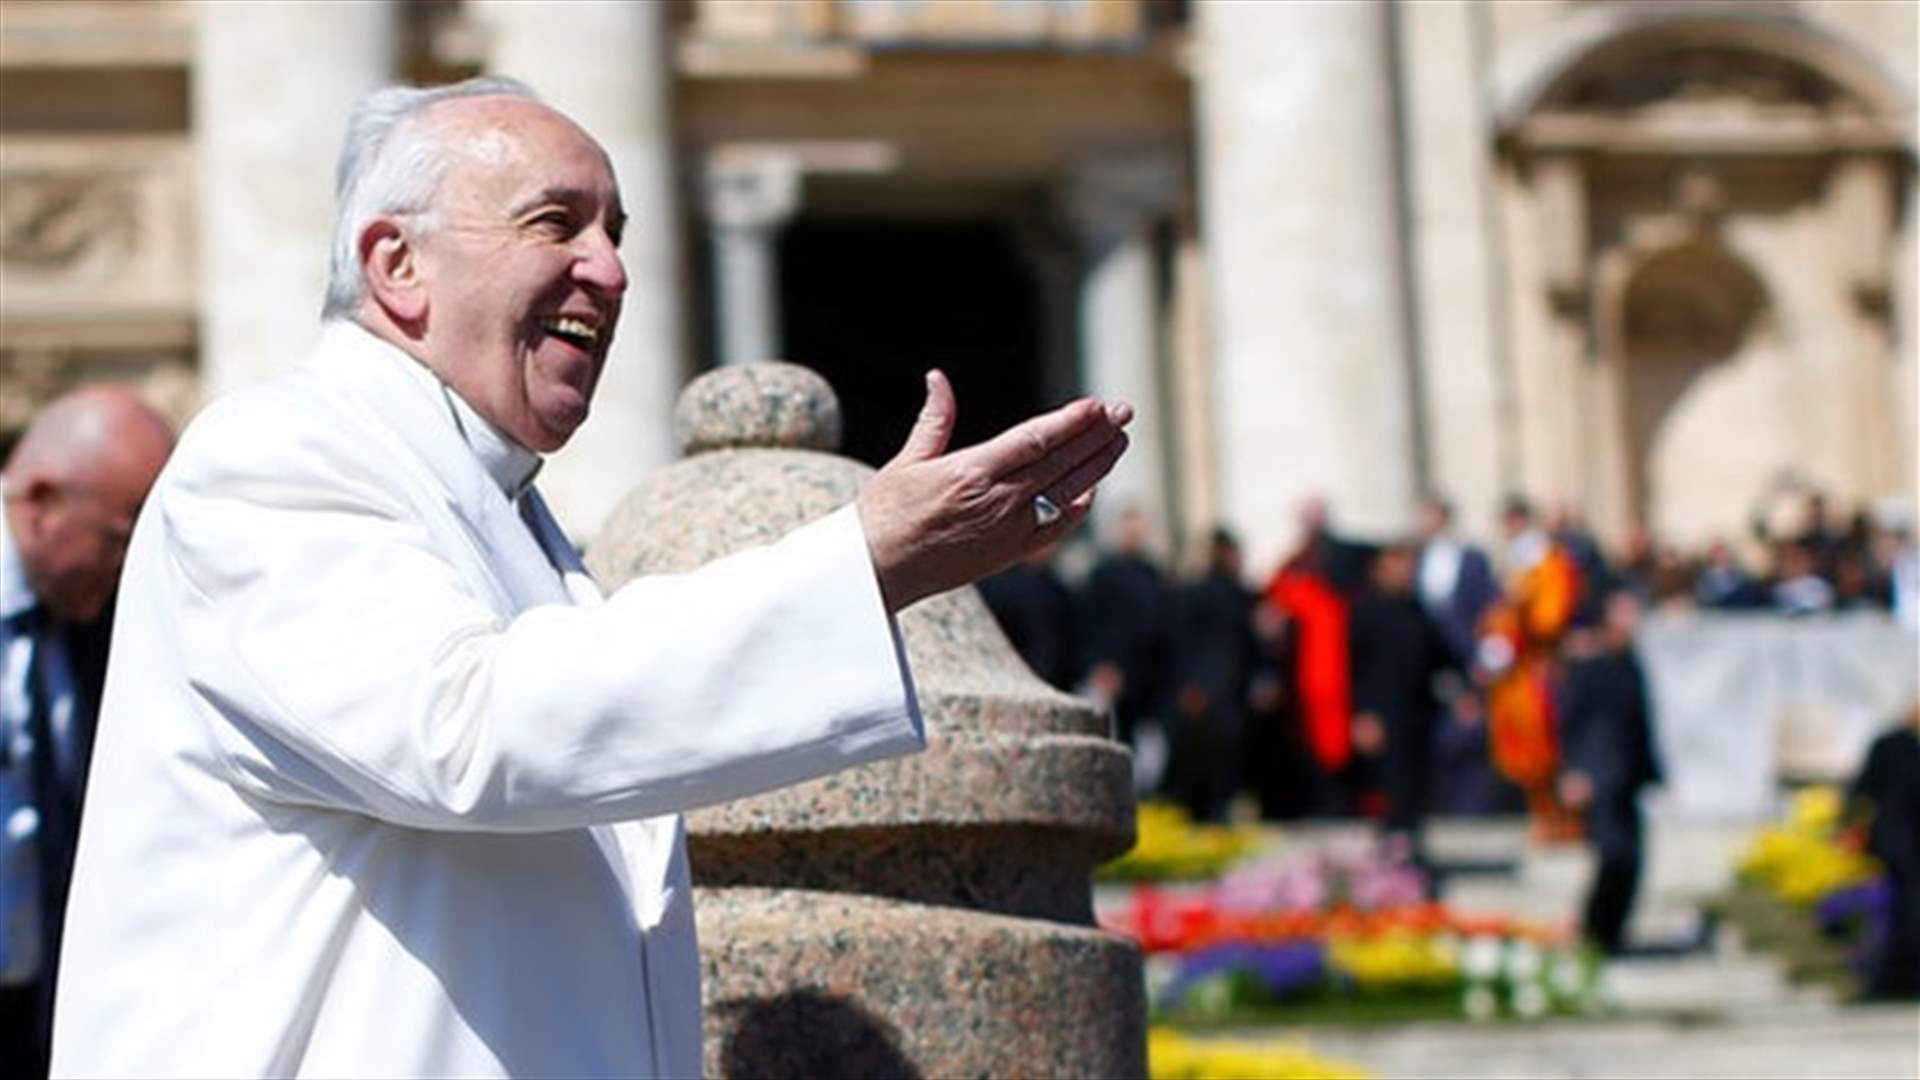 Pope urges powerful to act humbly in surprise TED talk appearance